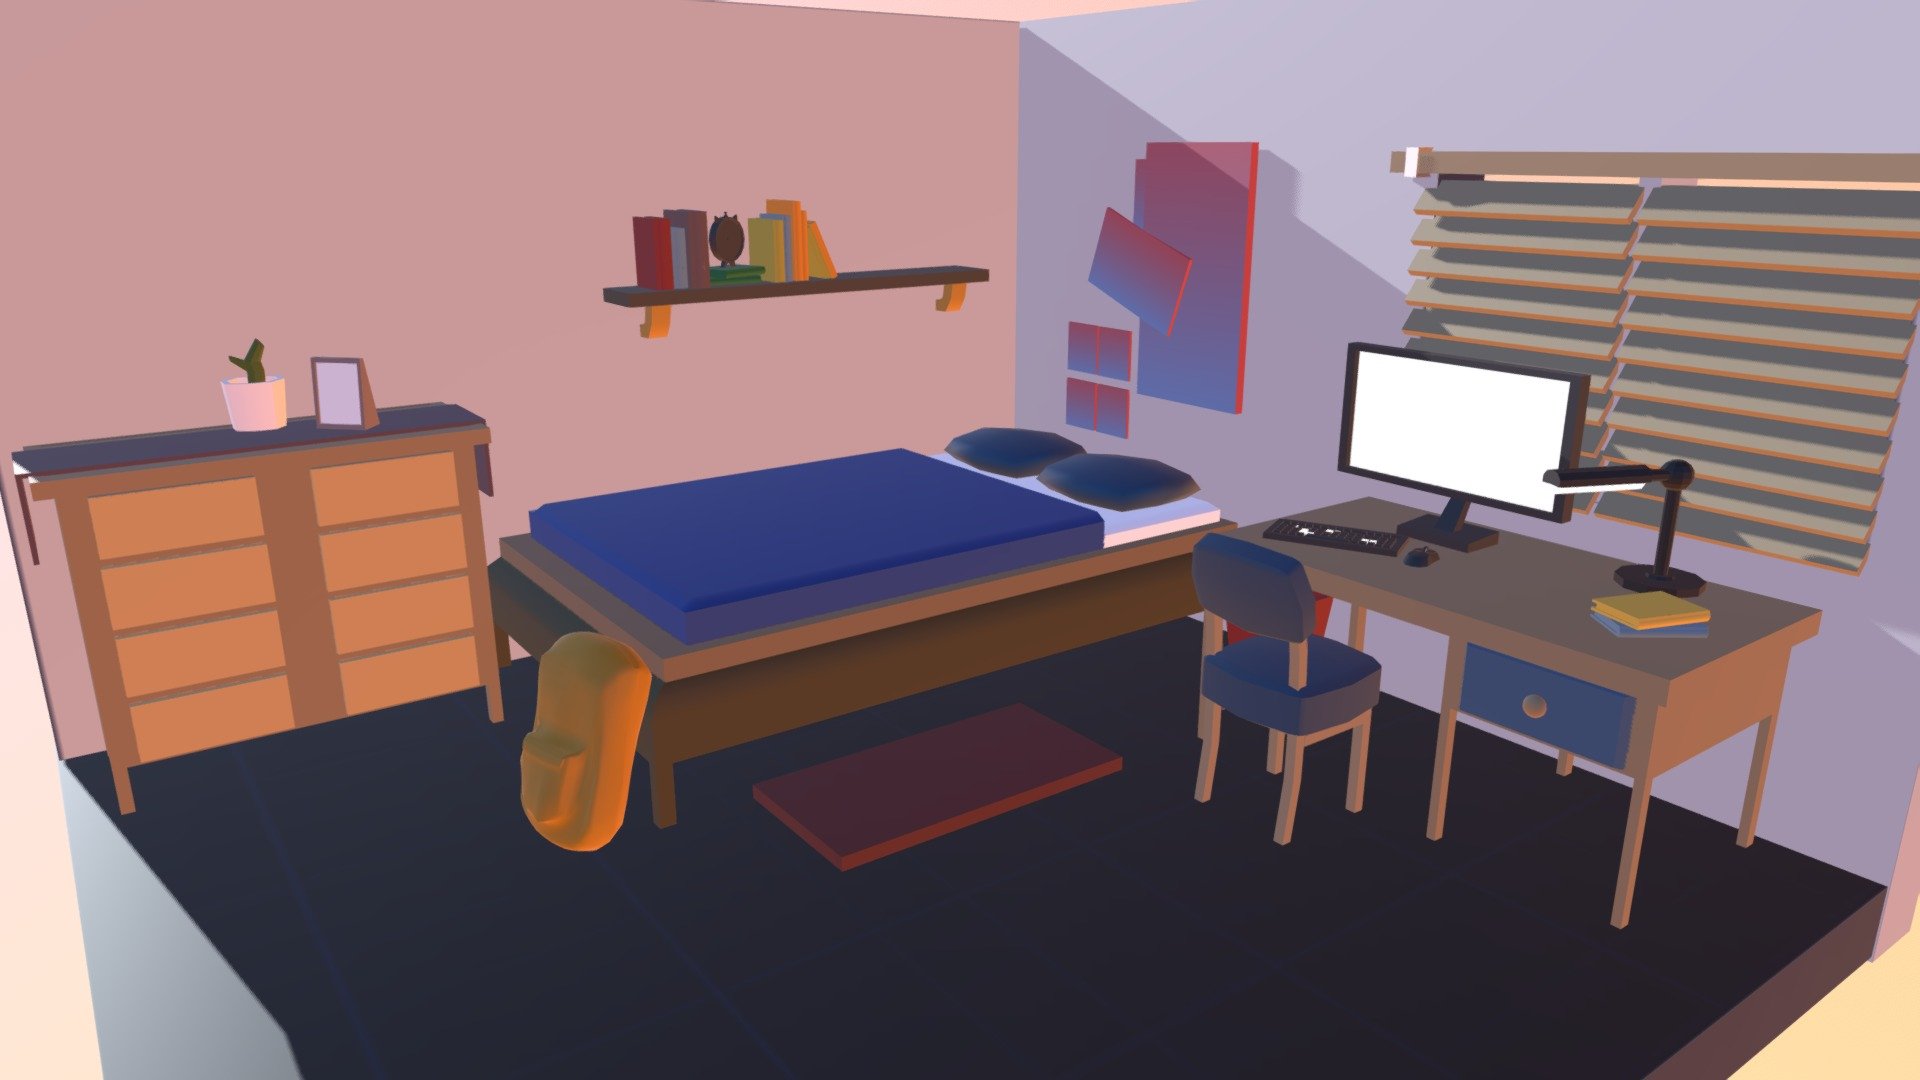 1 - A simple lowpoly style room 3d model